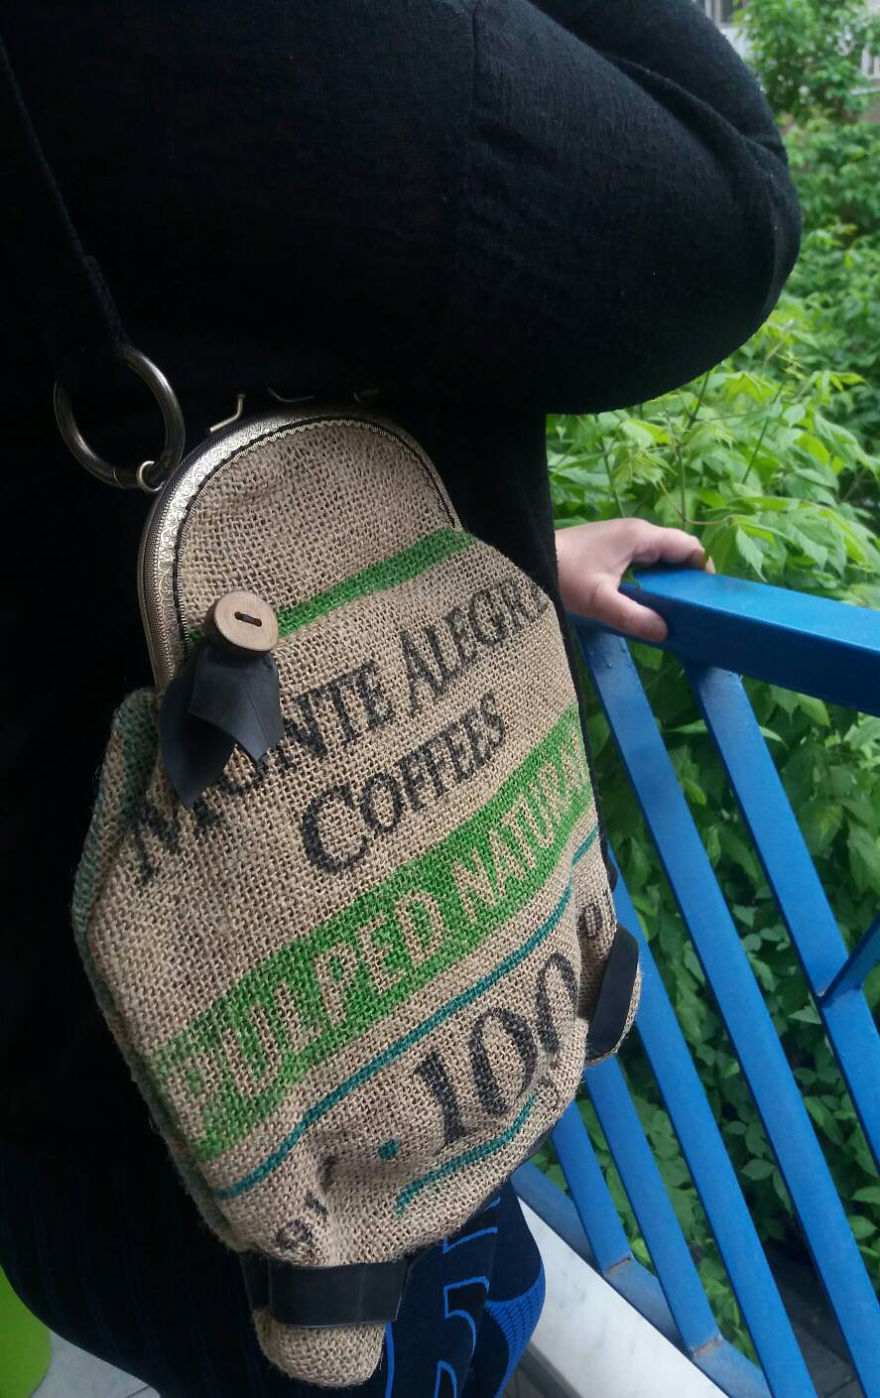 I Make Upcycled Accessories Out Of Used Bike Inner Tubes And Burlap Coffee Sacks